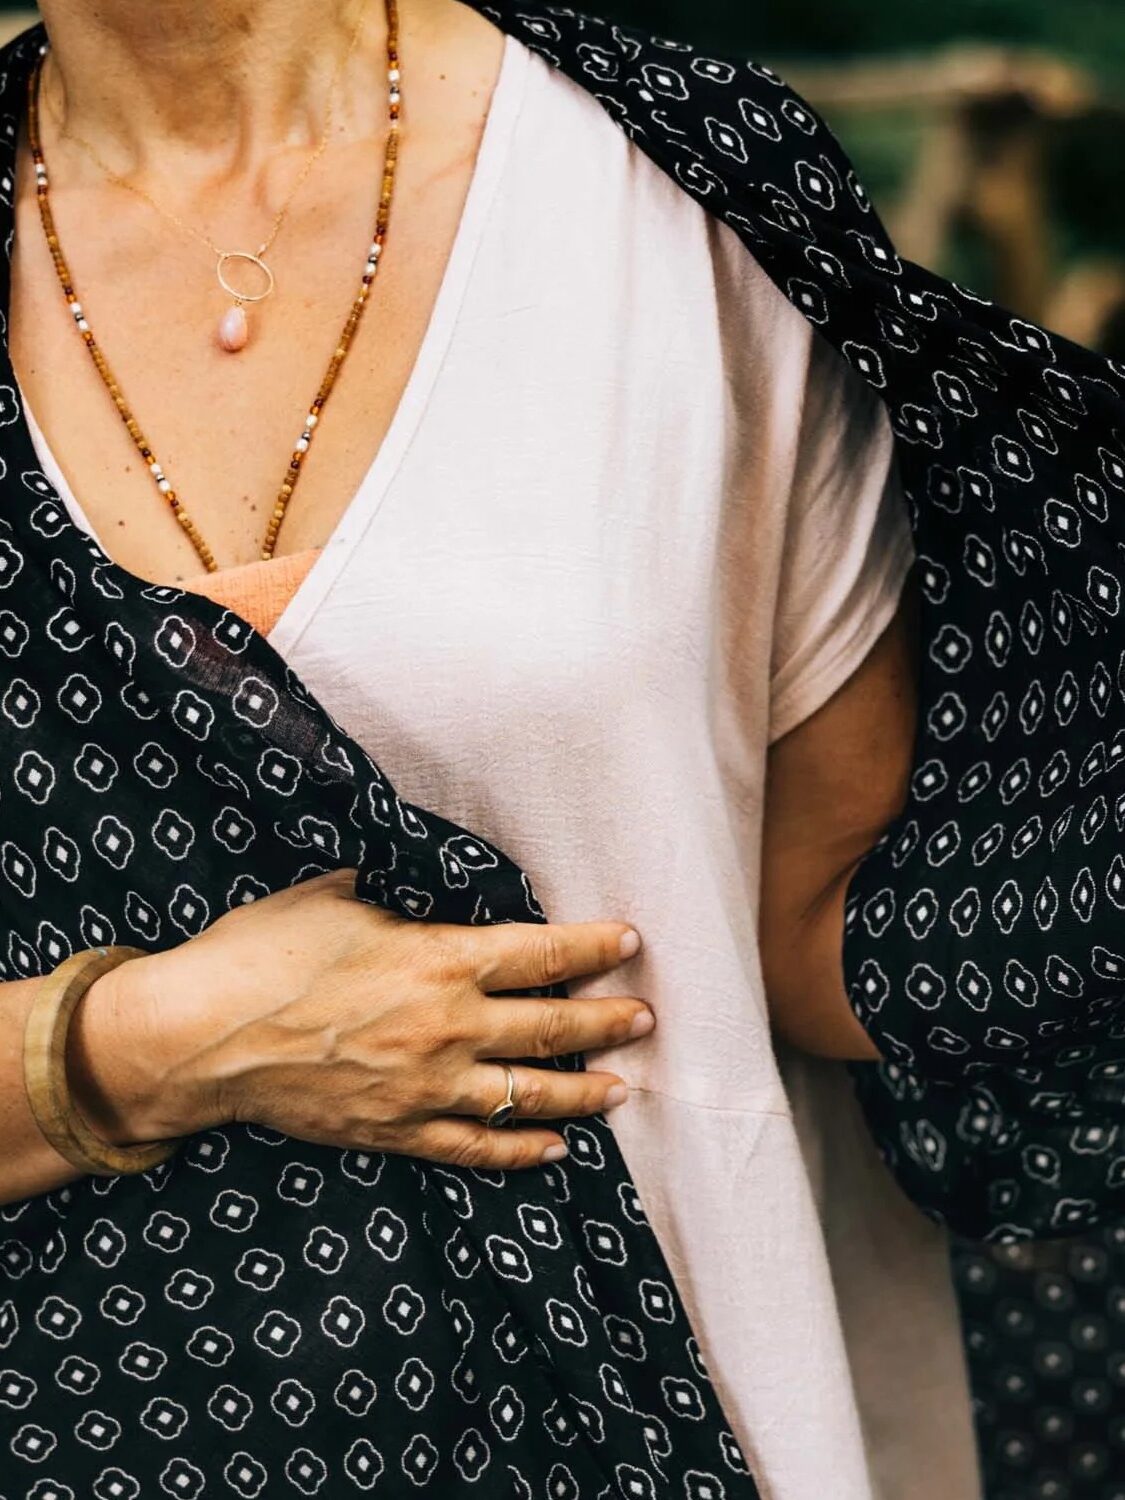 Close-up of a woman wearing a white top and black patterned shawl, her hand resting on her chest with visible necklaces and a bracelet.